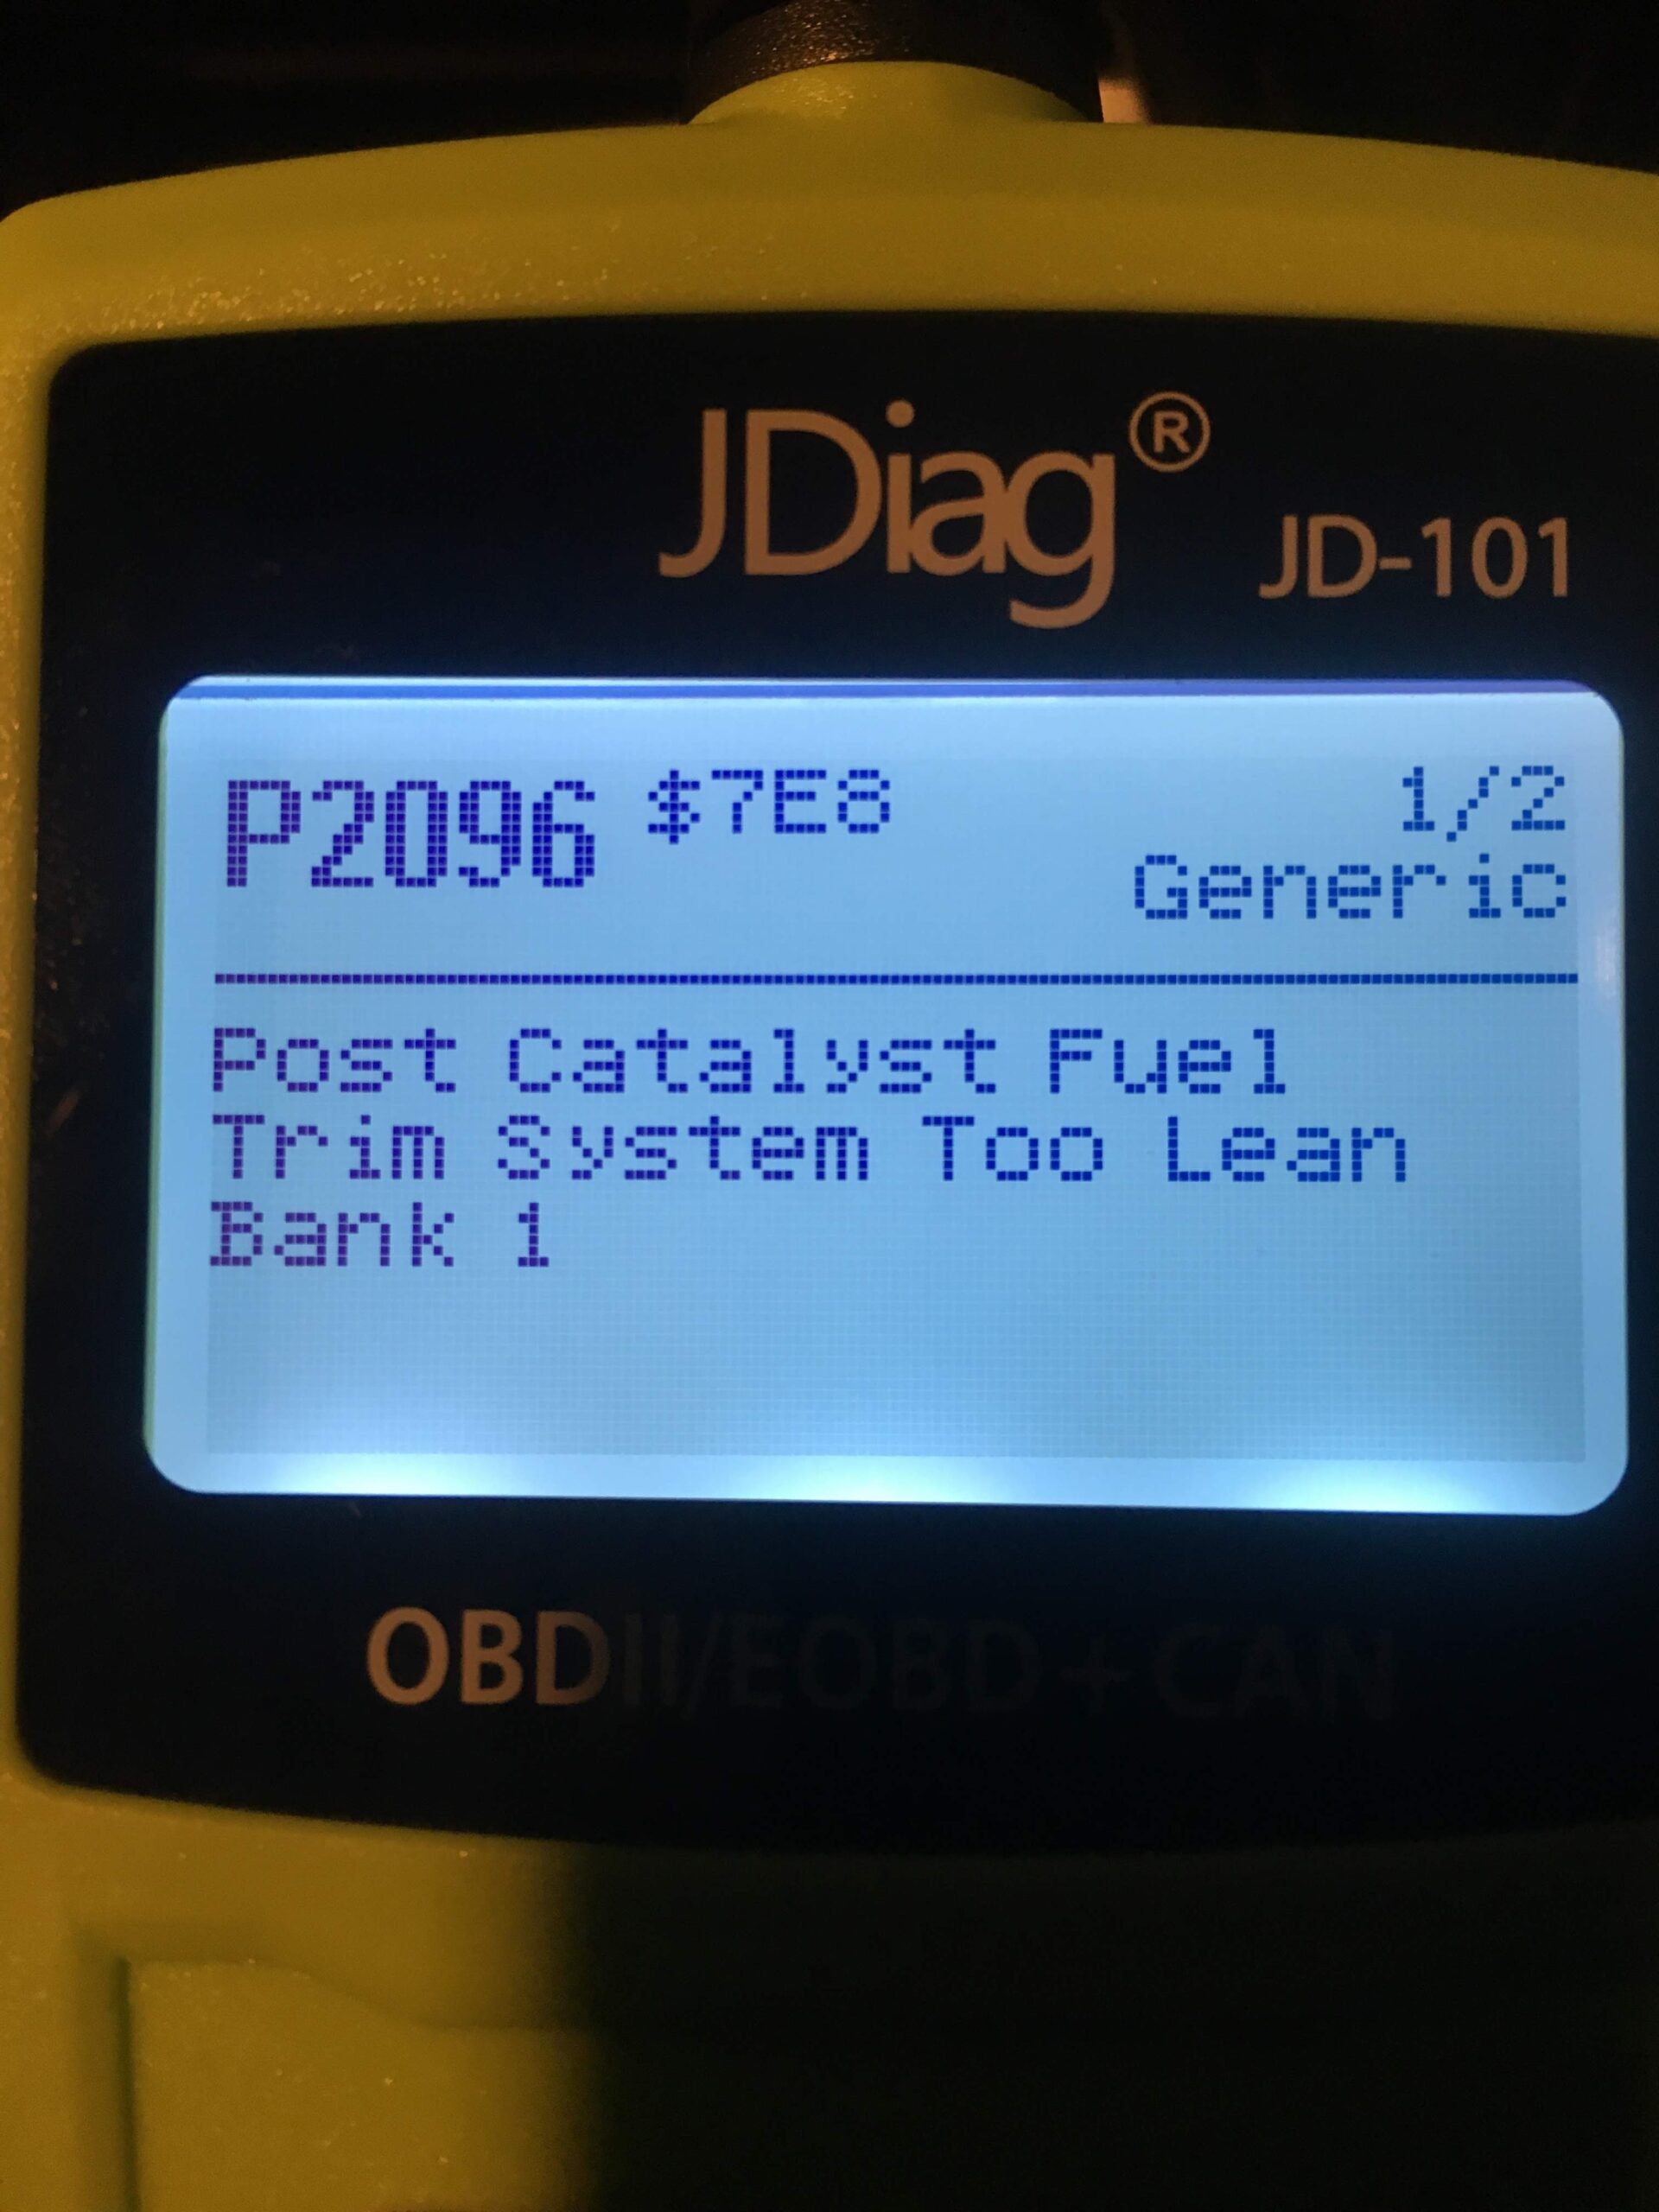 Post Catalyst Fuel Trim System and Common Trouble Codes